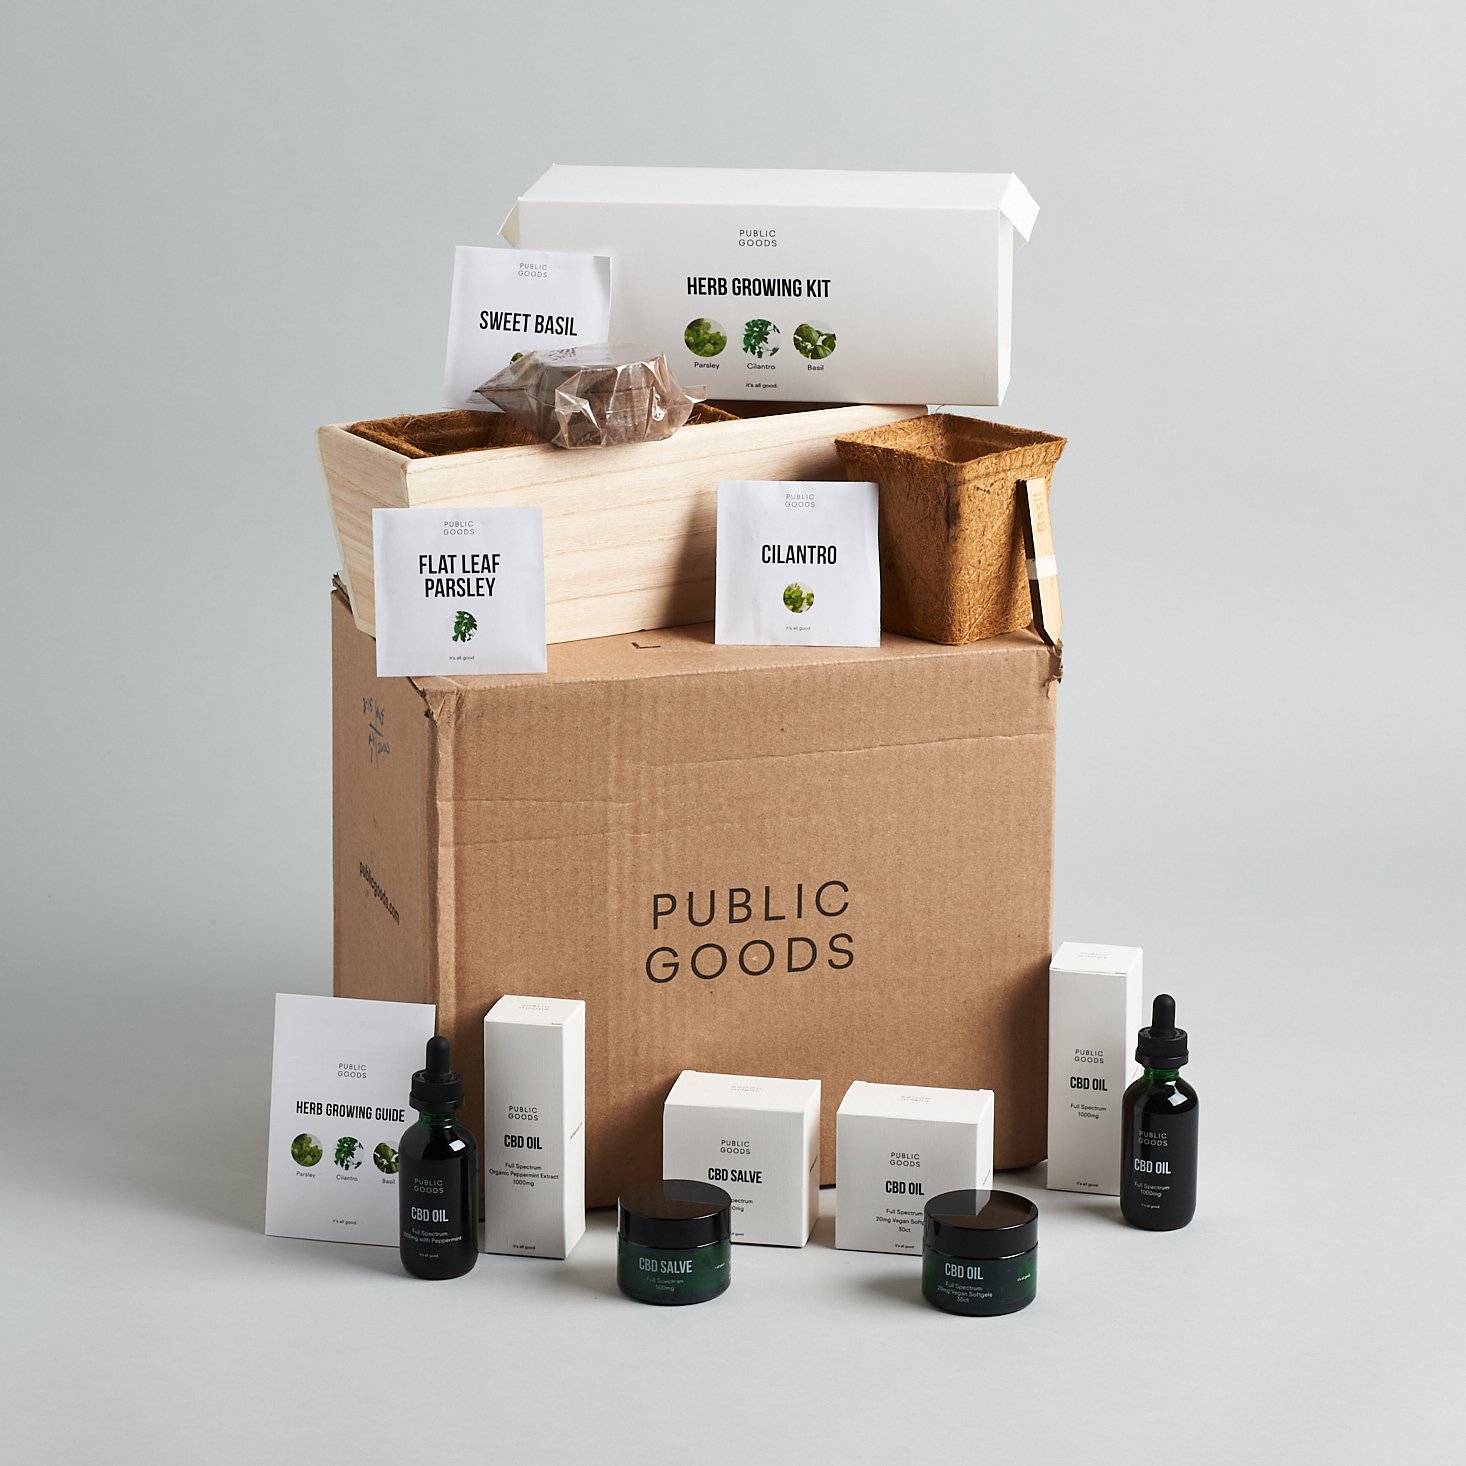 New Eco-Friendly Herb Growing Kit & CBD Products From Public Goods